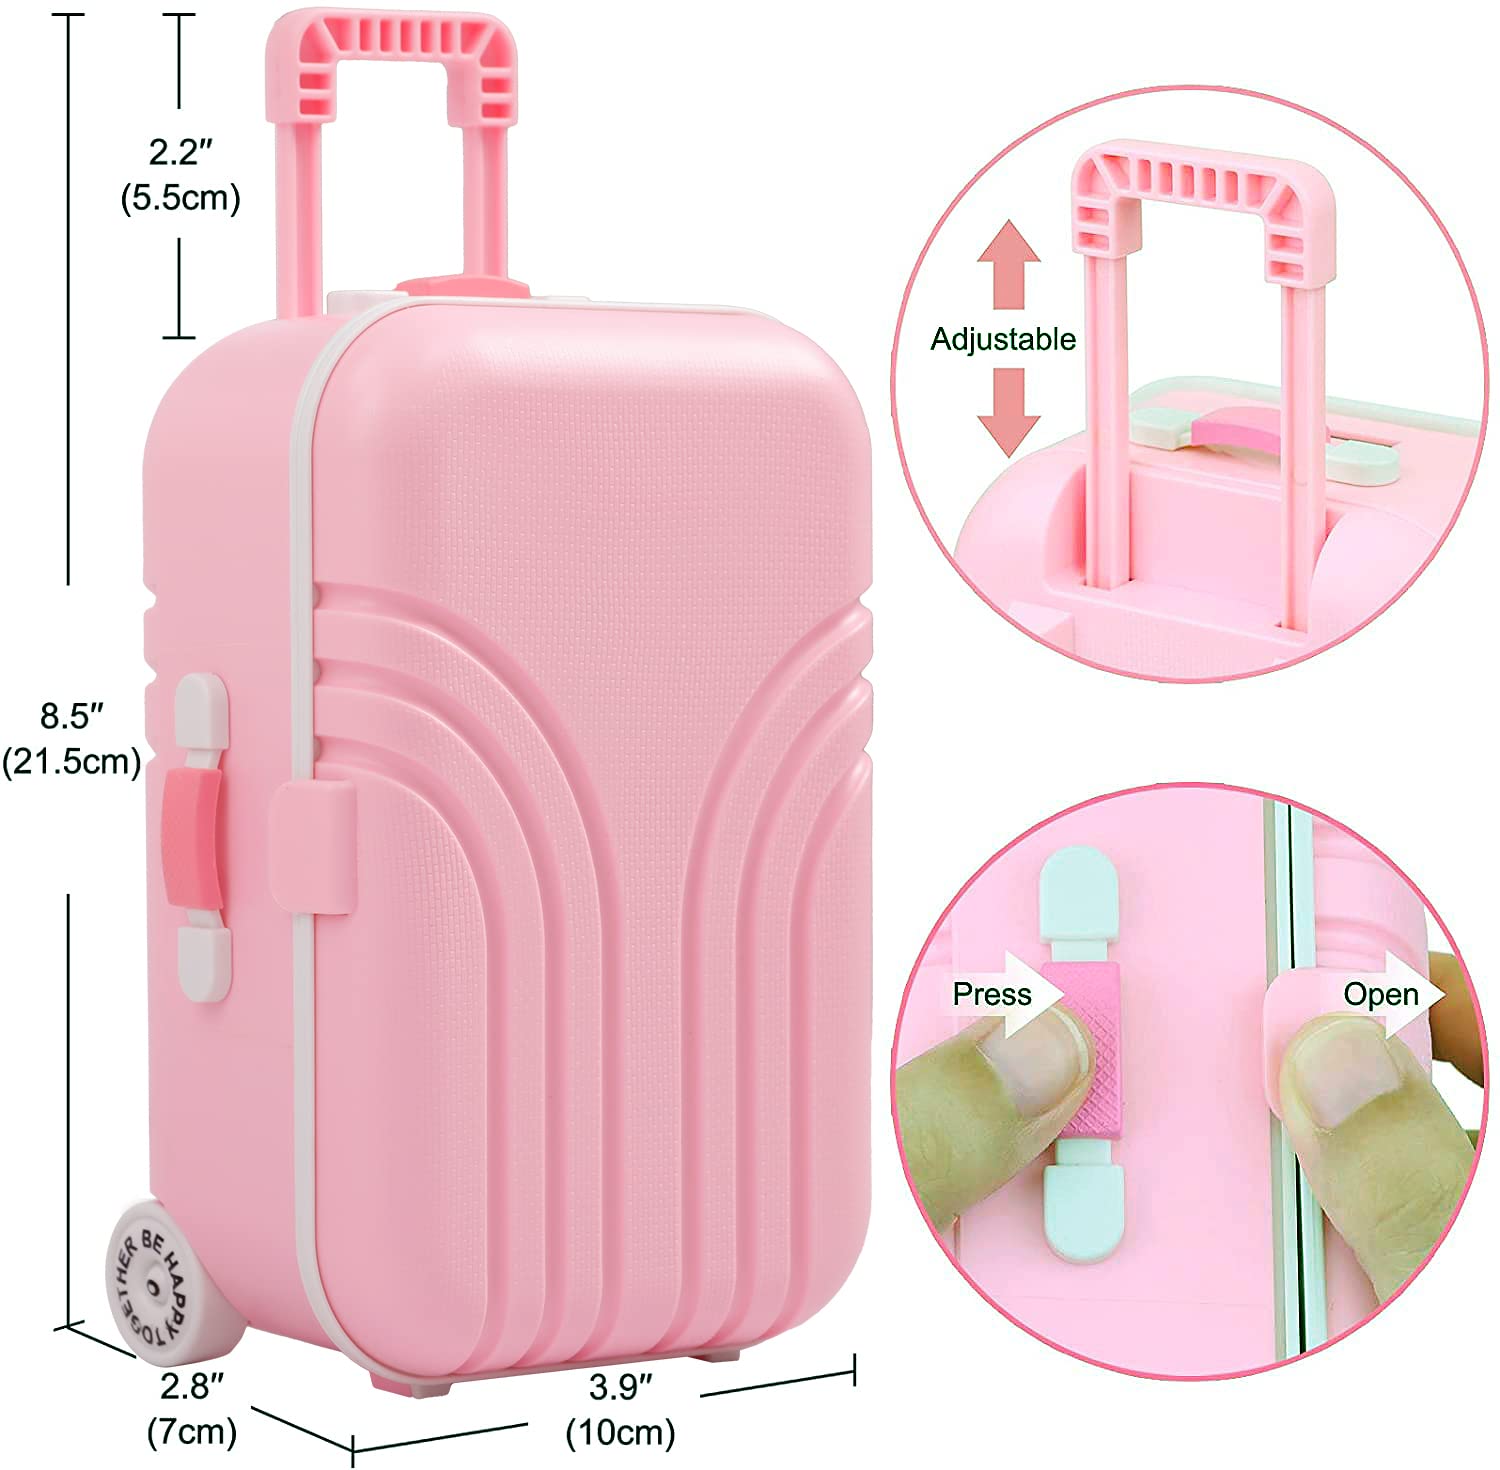 Windolls 18 Inch Doll Suitcase Travel Luggage Play Accessories - 18